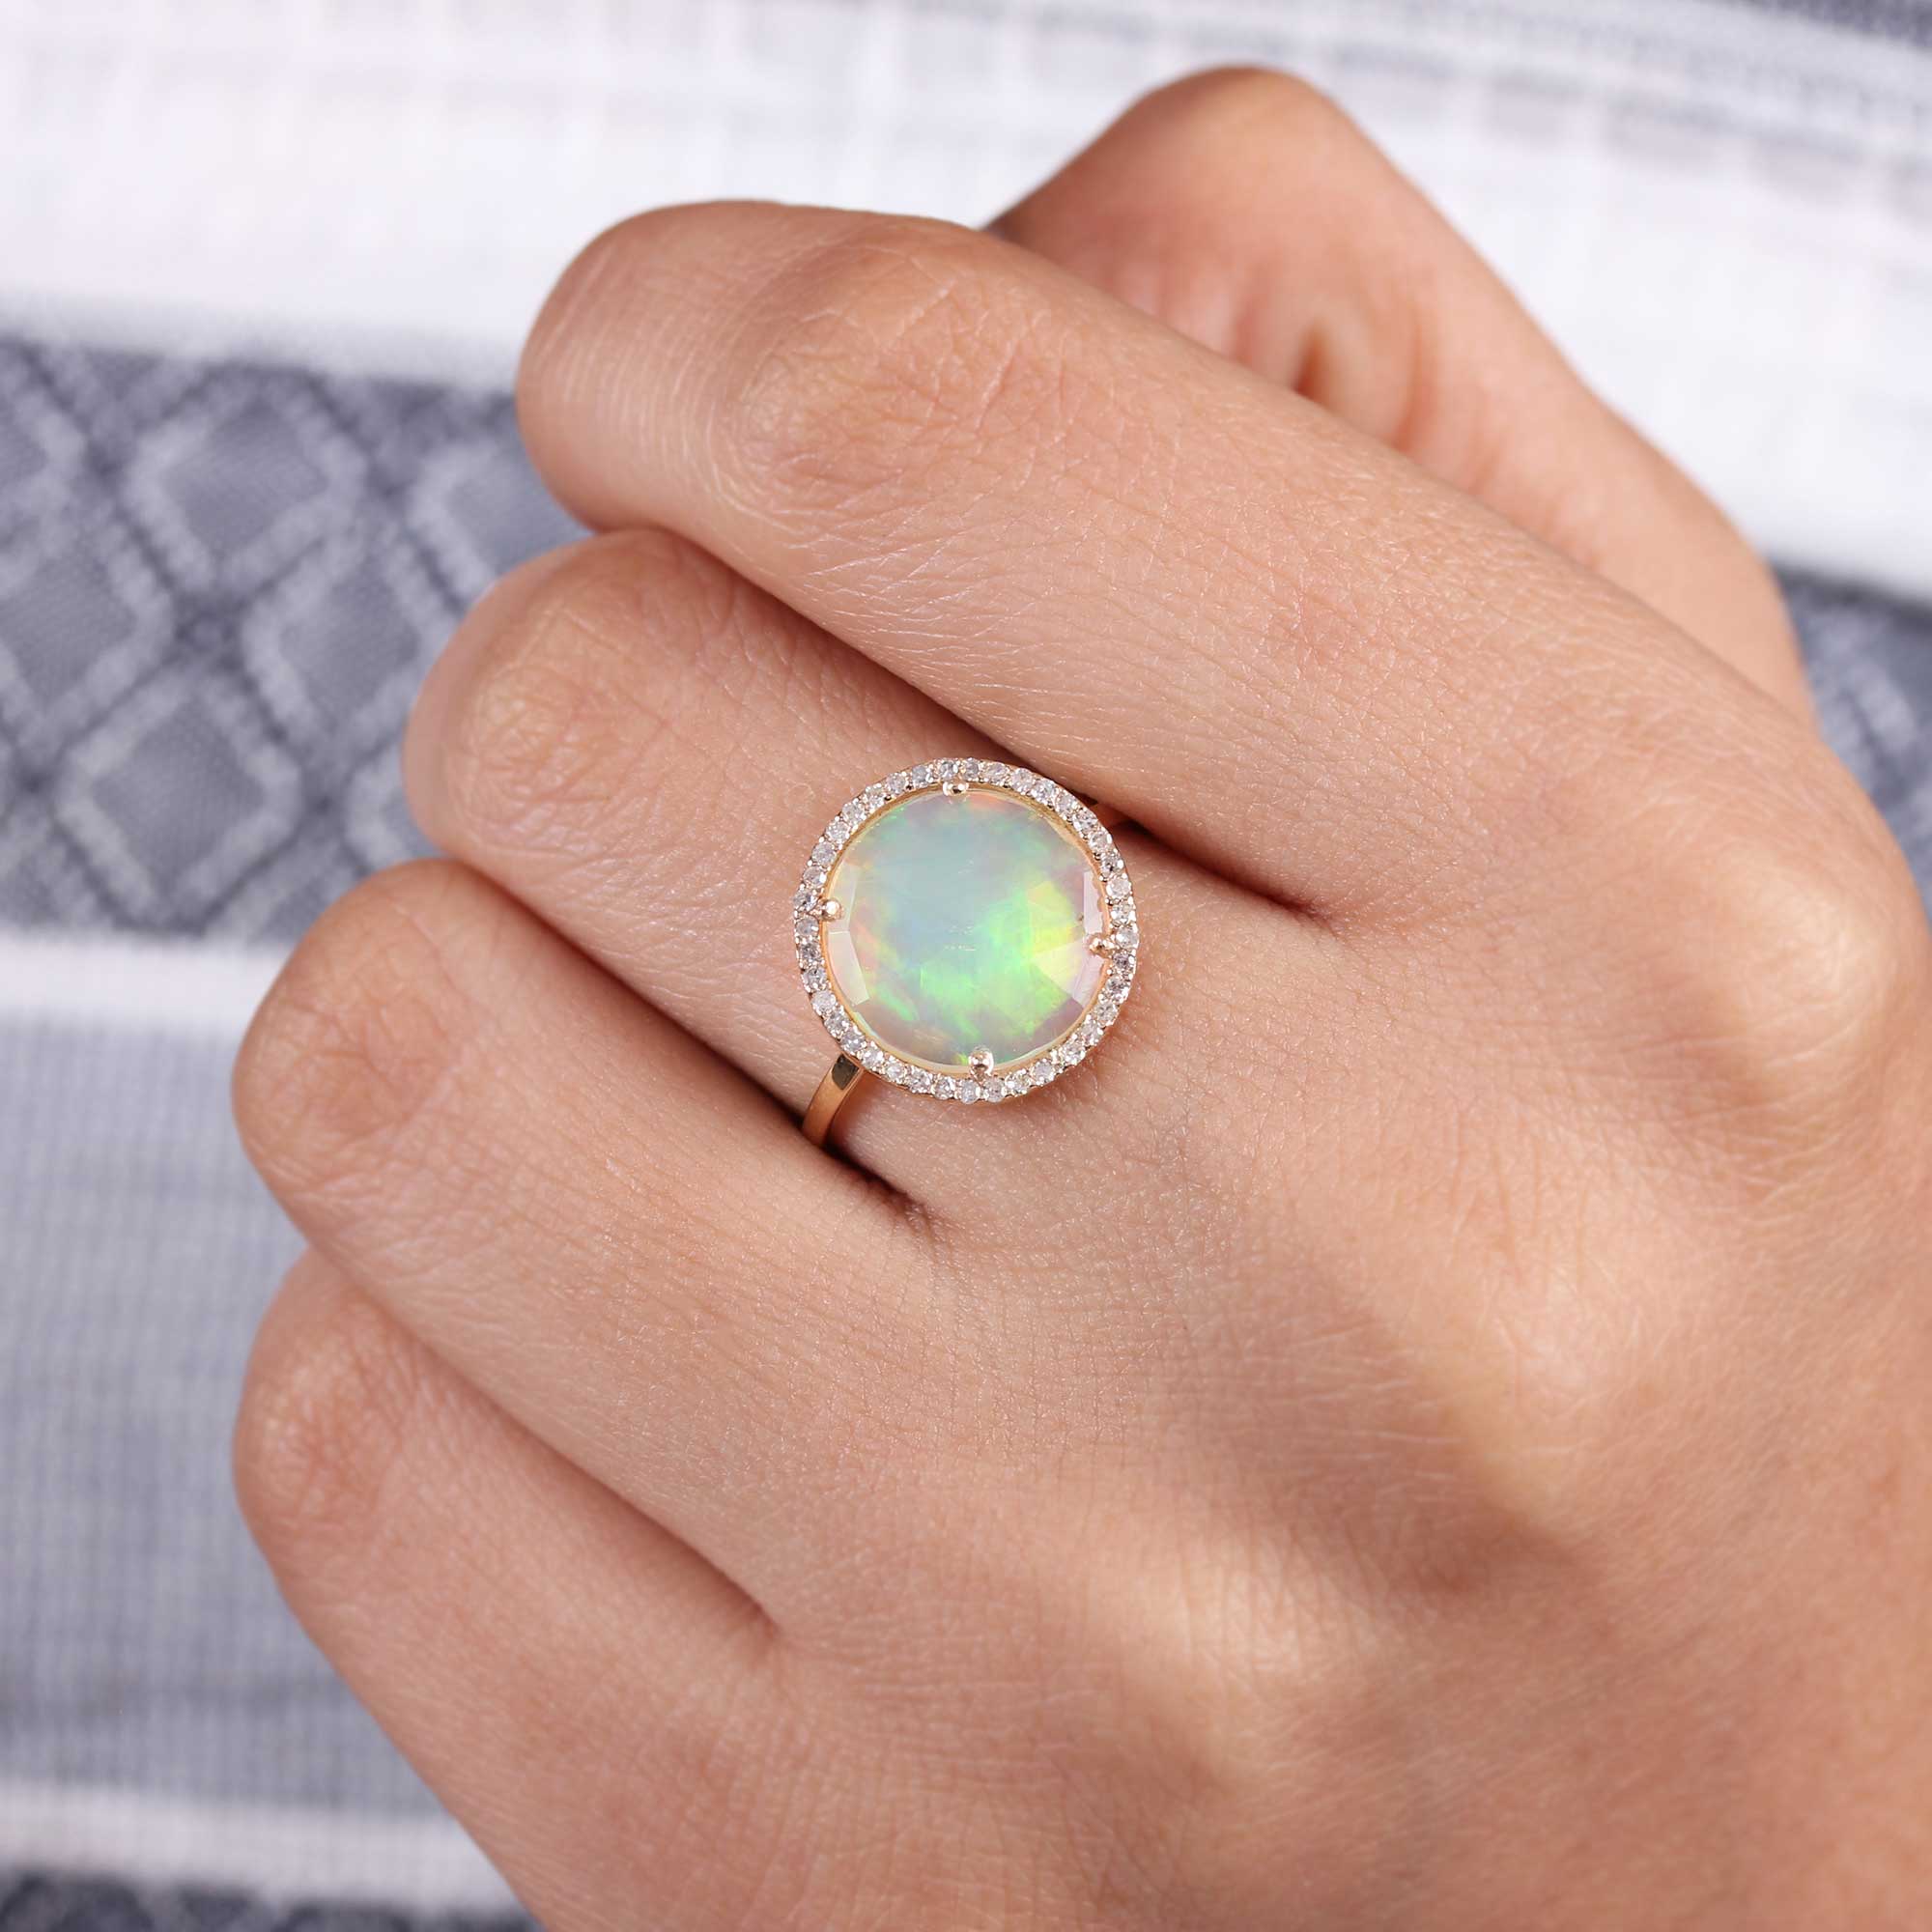 Gemstone Opal Natural Diamond Solid 14K Gold Ring Jewelry